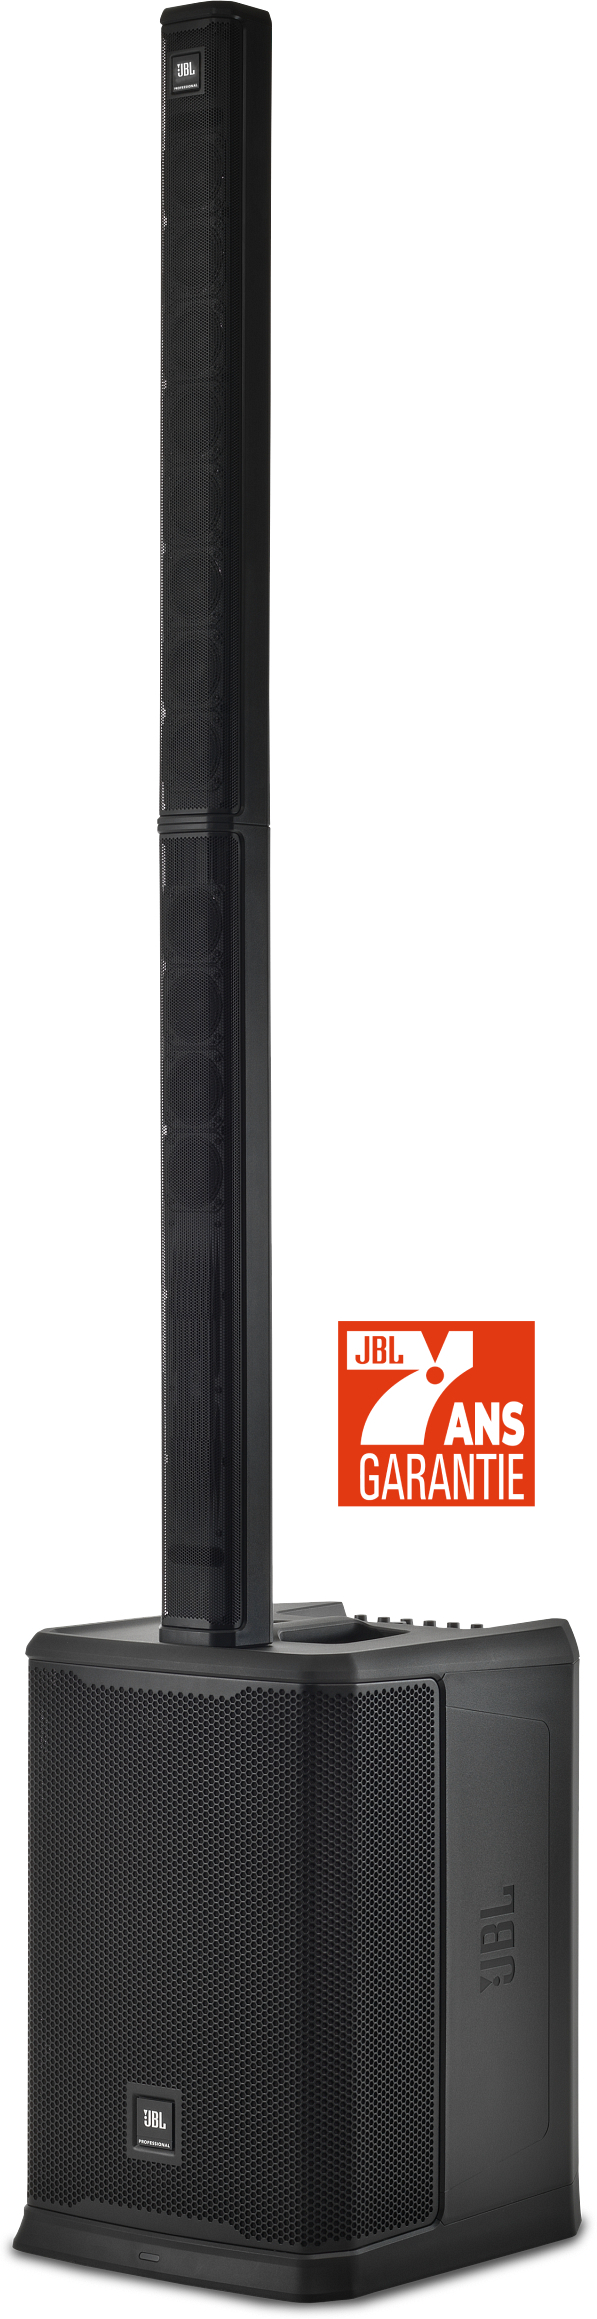 Jbl Prx One - Systemes Colonnes - Main picture